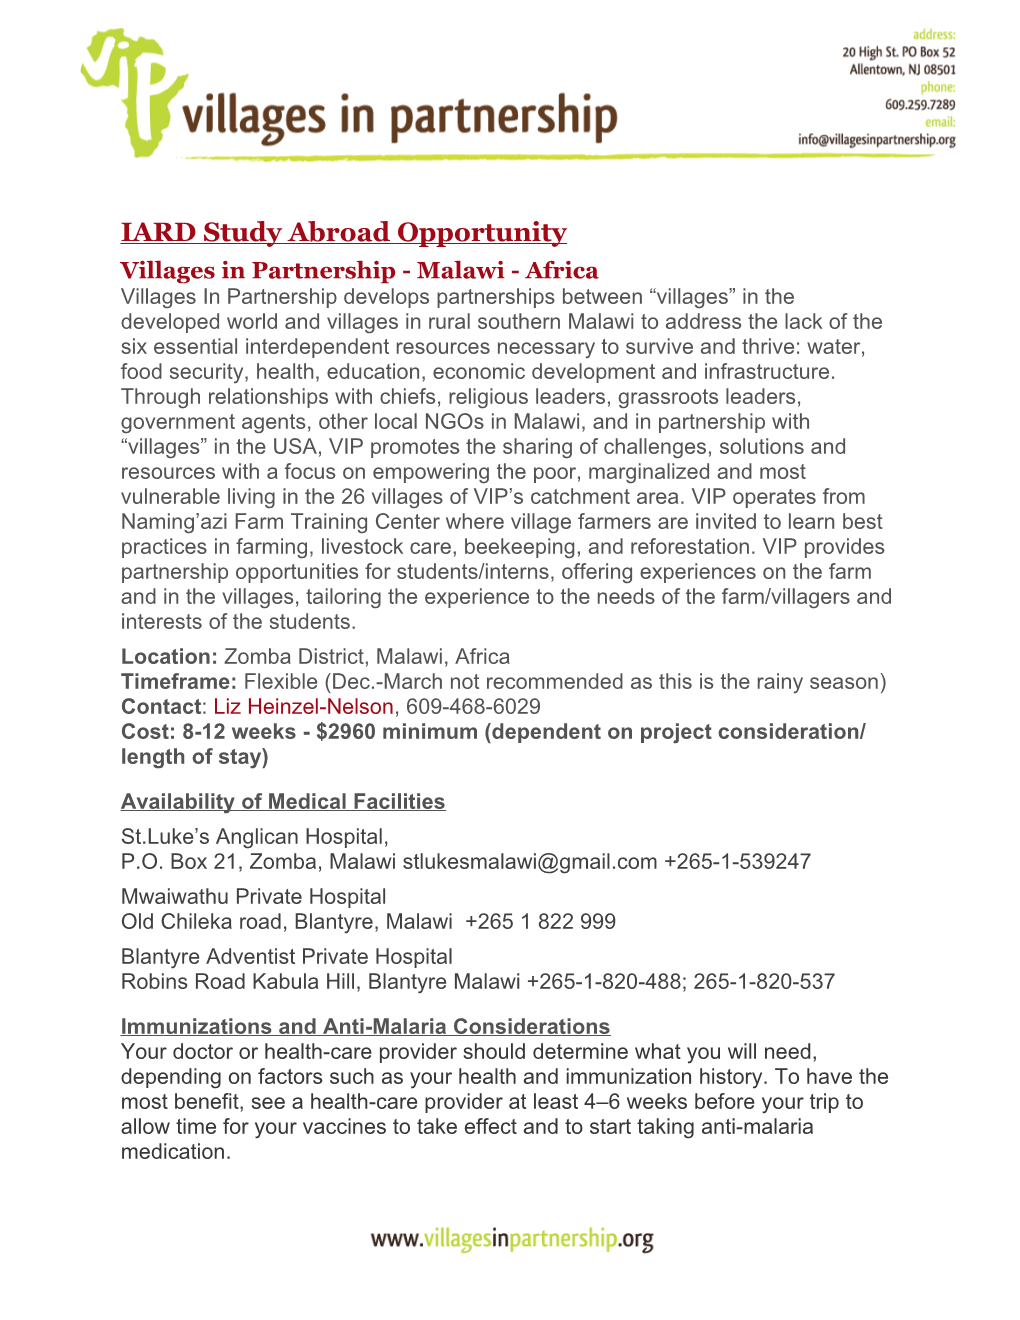 IARD Study Abroad Opportunity